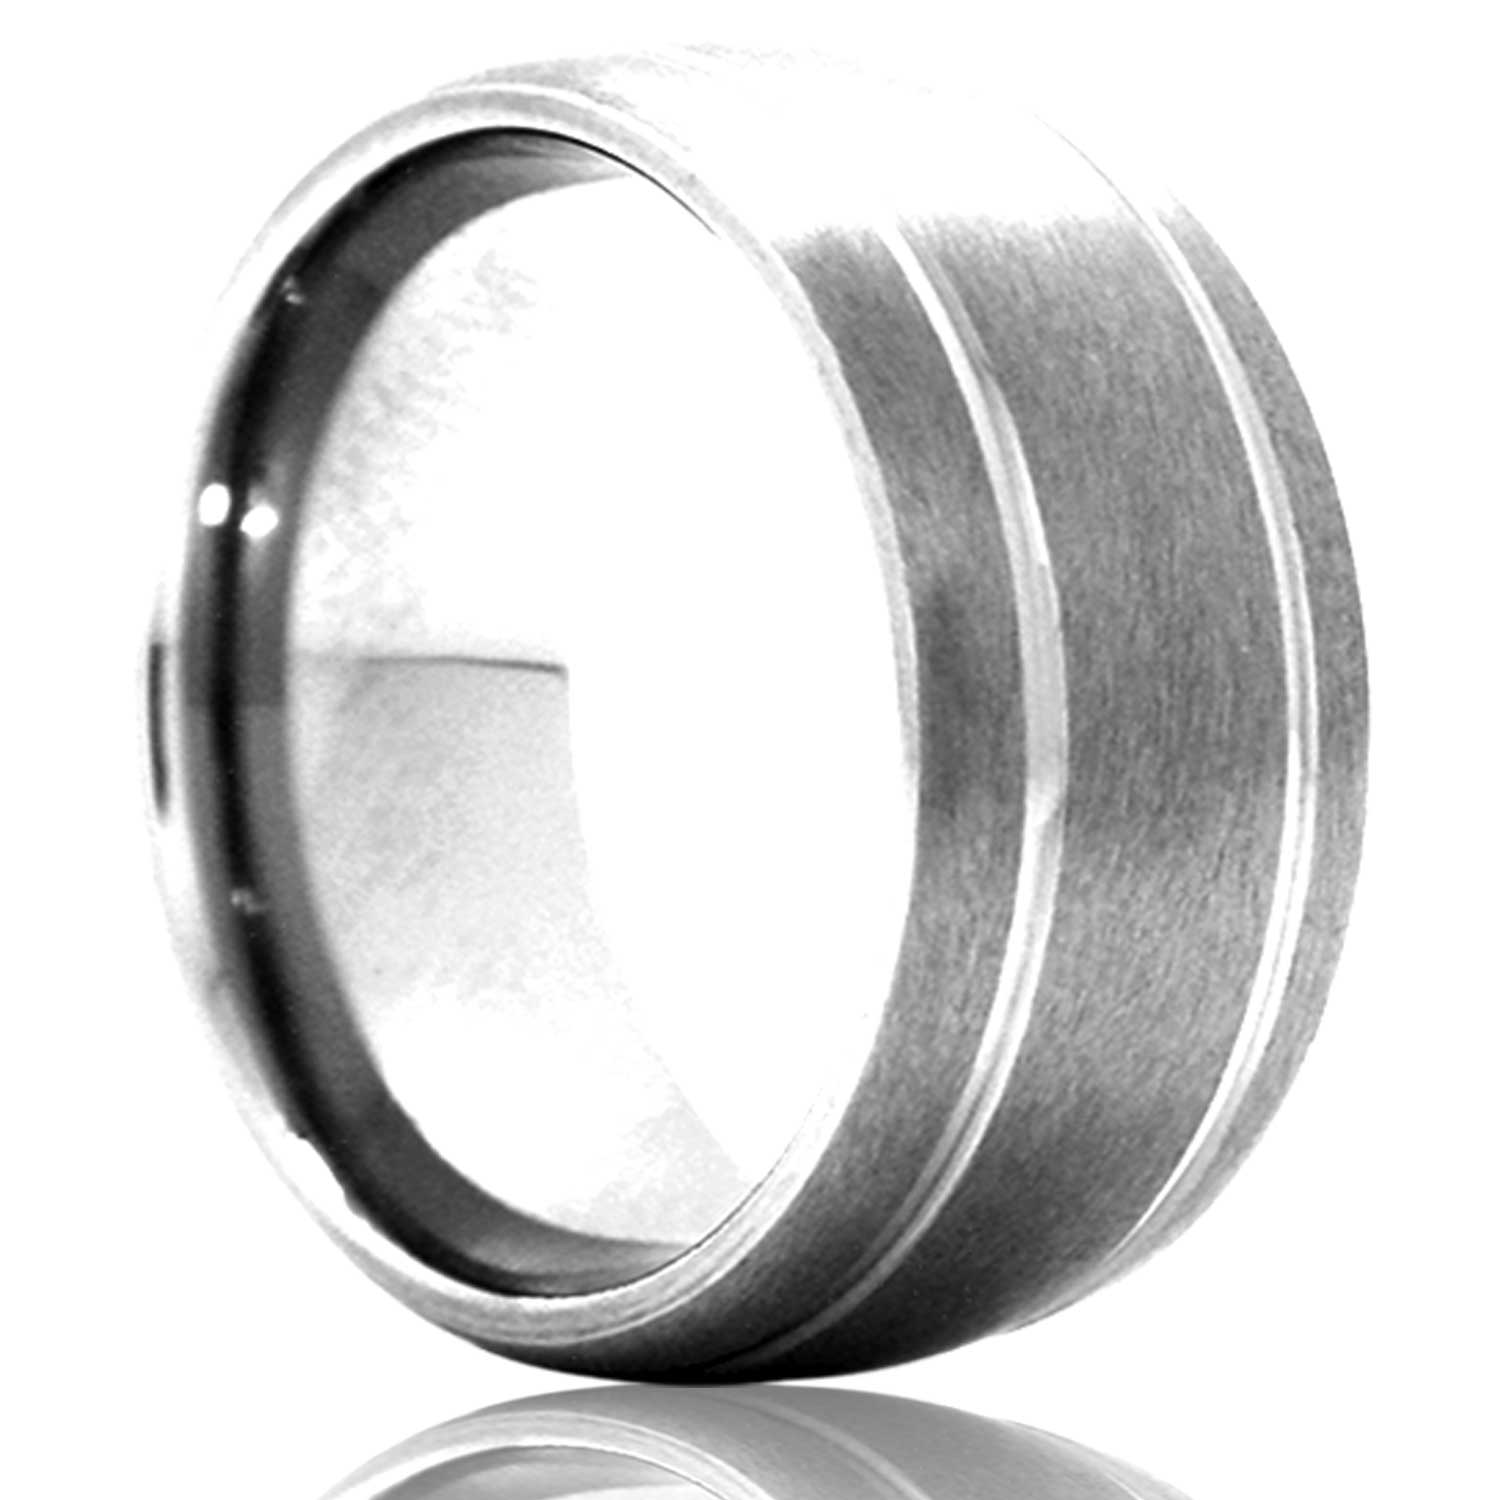 A domed satin finish tungsten wedding band with grooved edges displayed on a neutral white background.